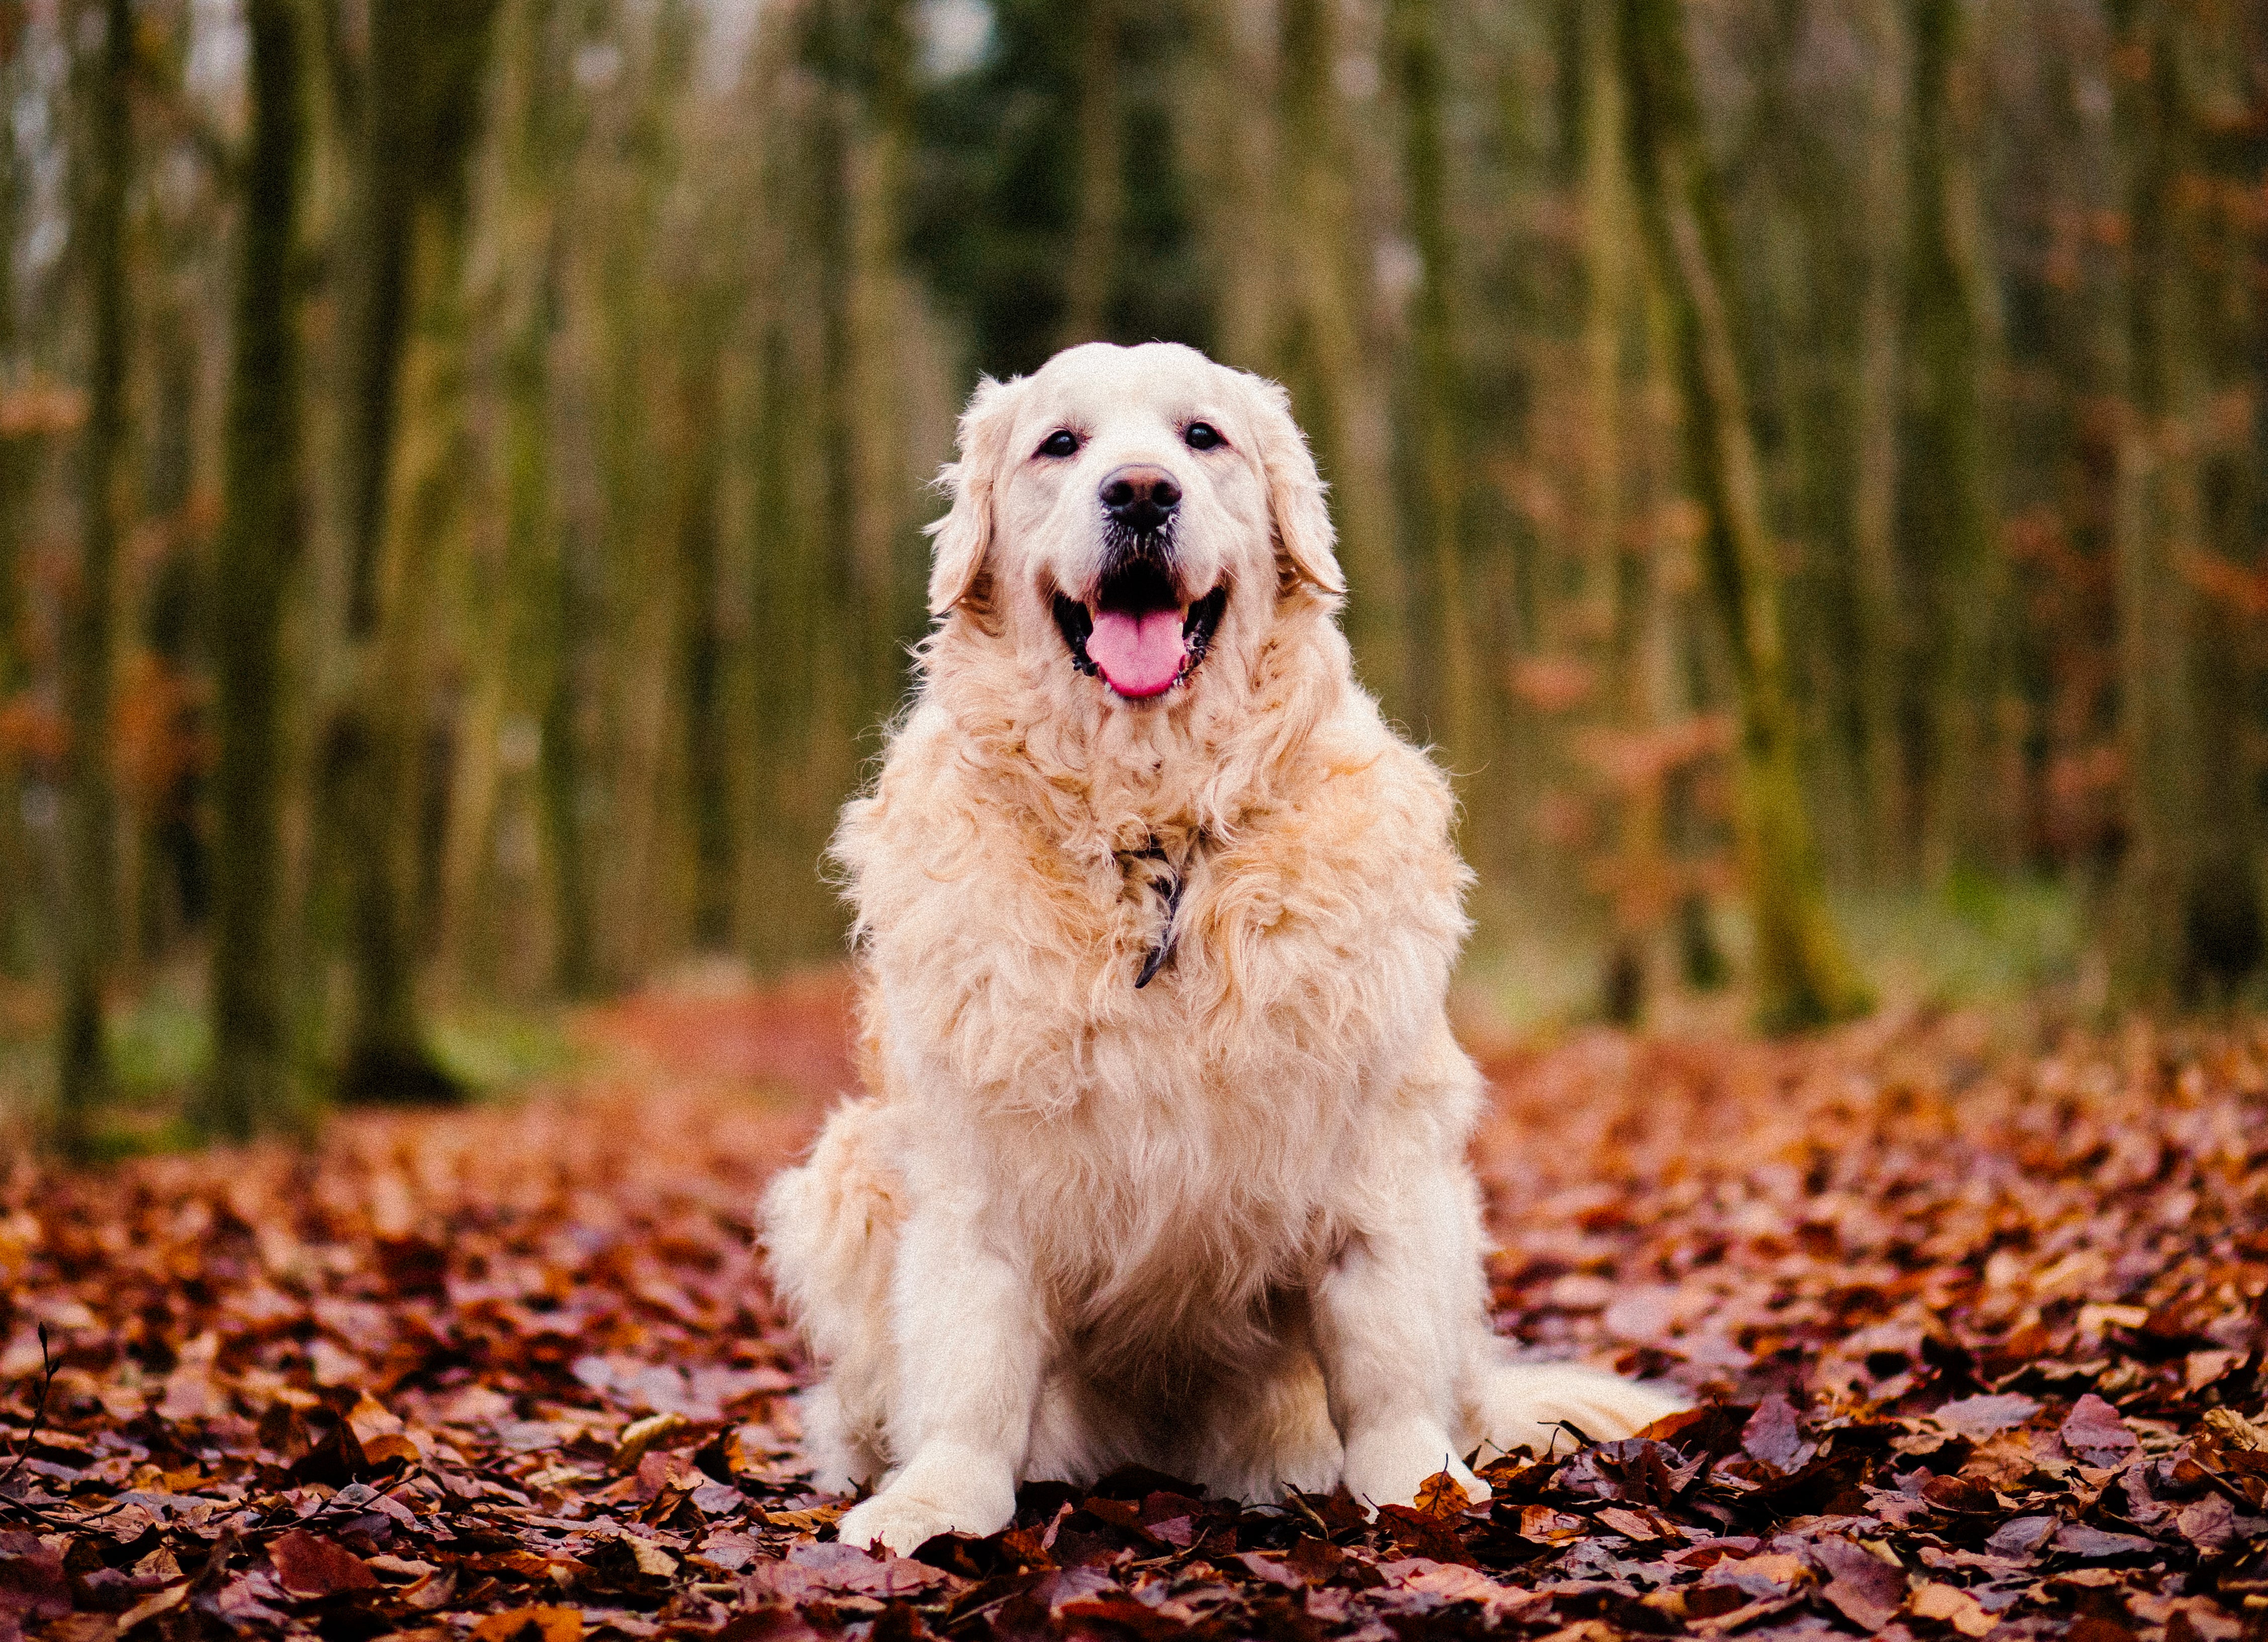 Thanksgiving Foods You Can Share With Your Dog